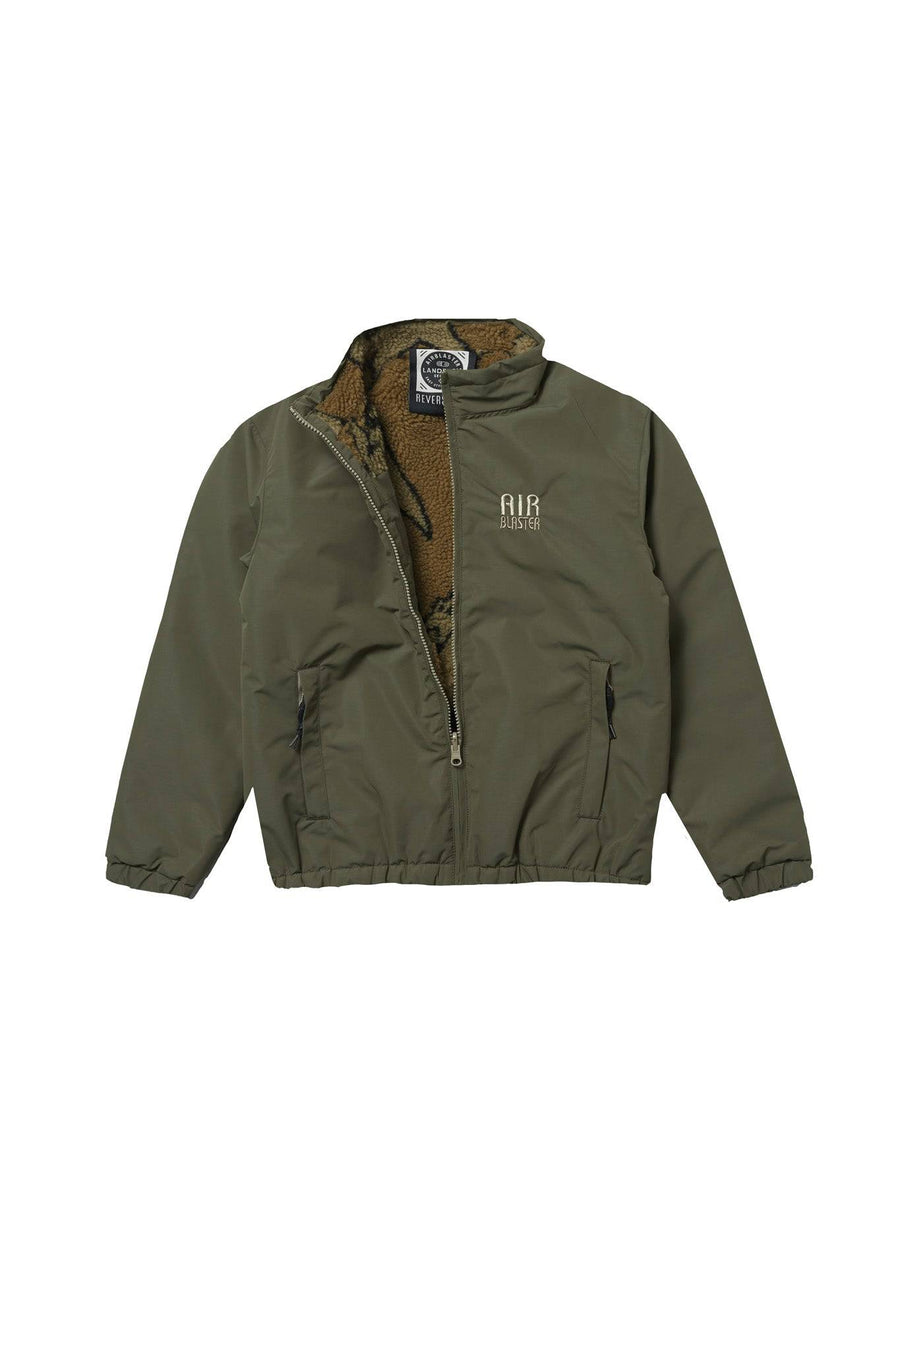 Airblaster Double Puff Jacket in Lizard and Tan Terry 2023